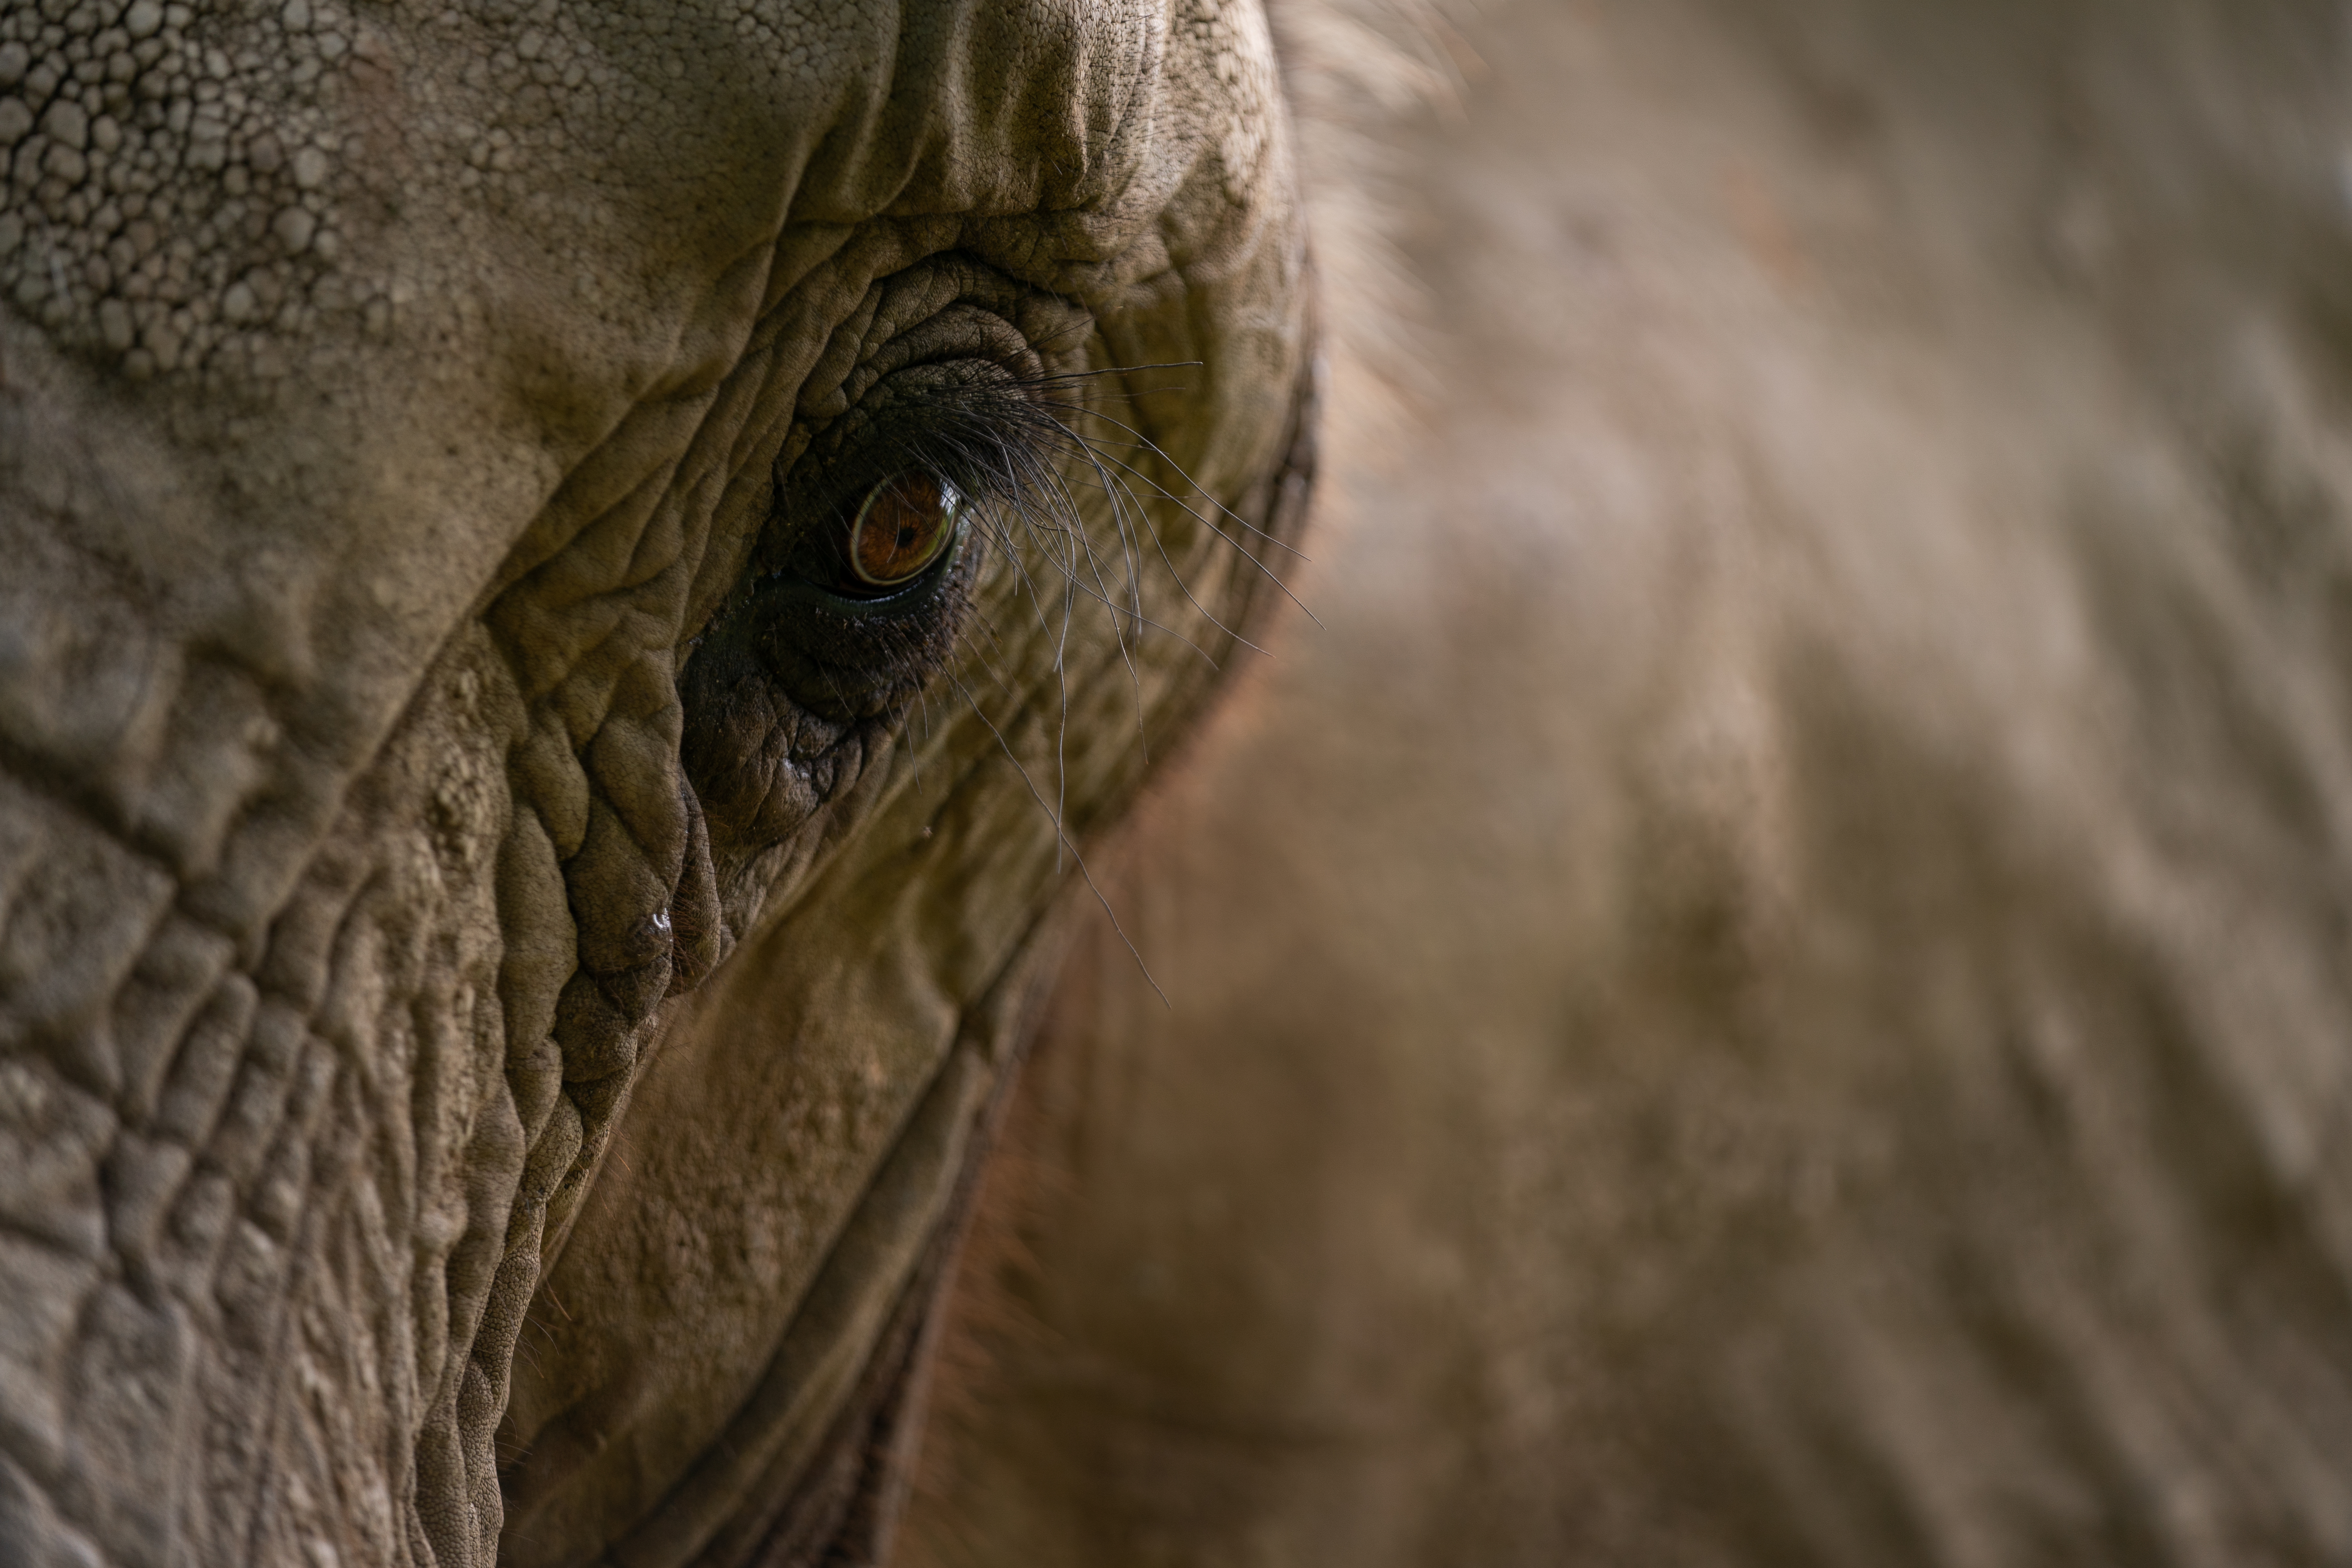 An elephant photographed close-up. The animal's face and left eye can be seen in great detail.